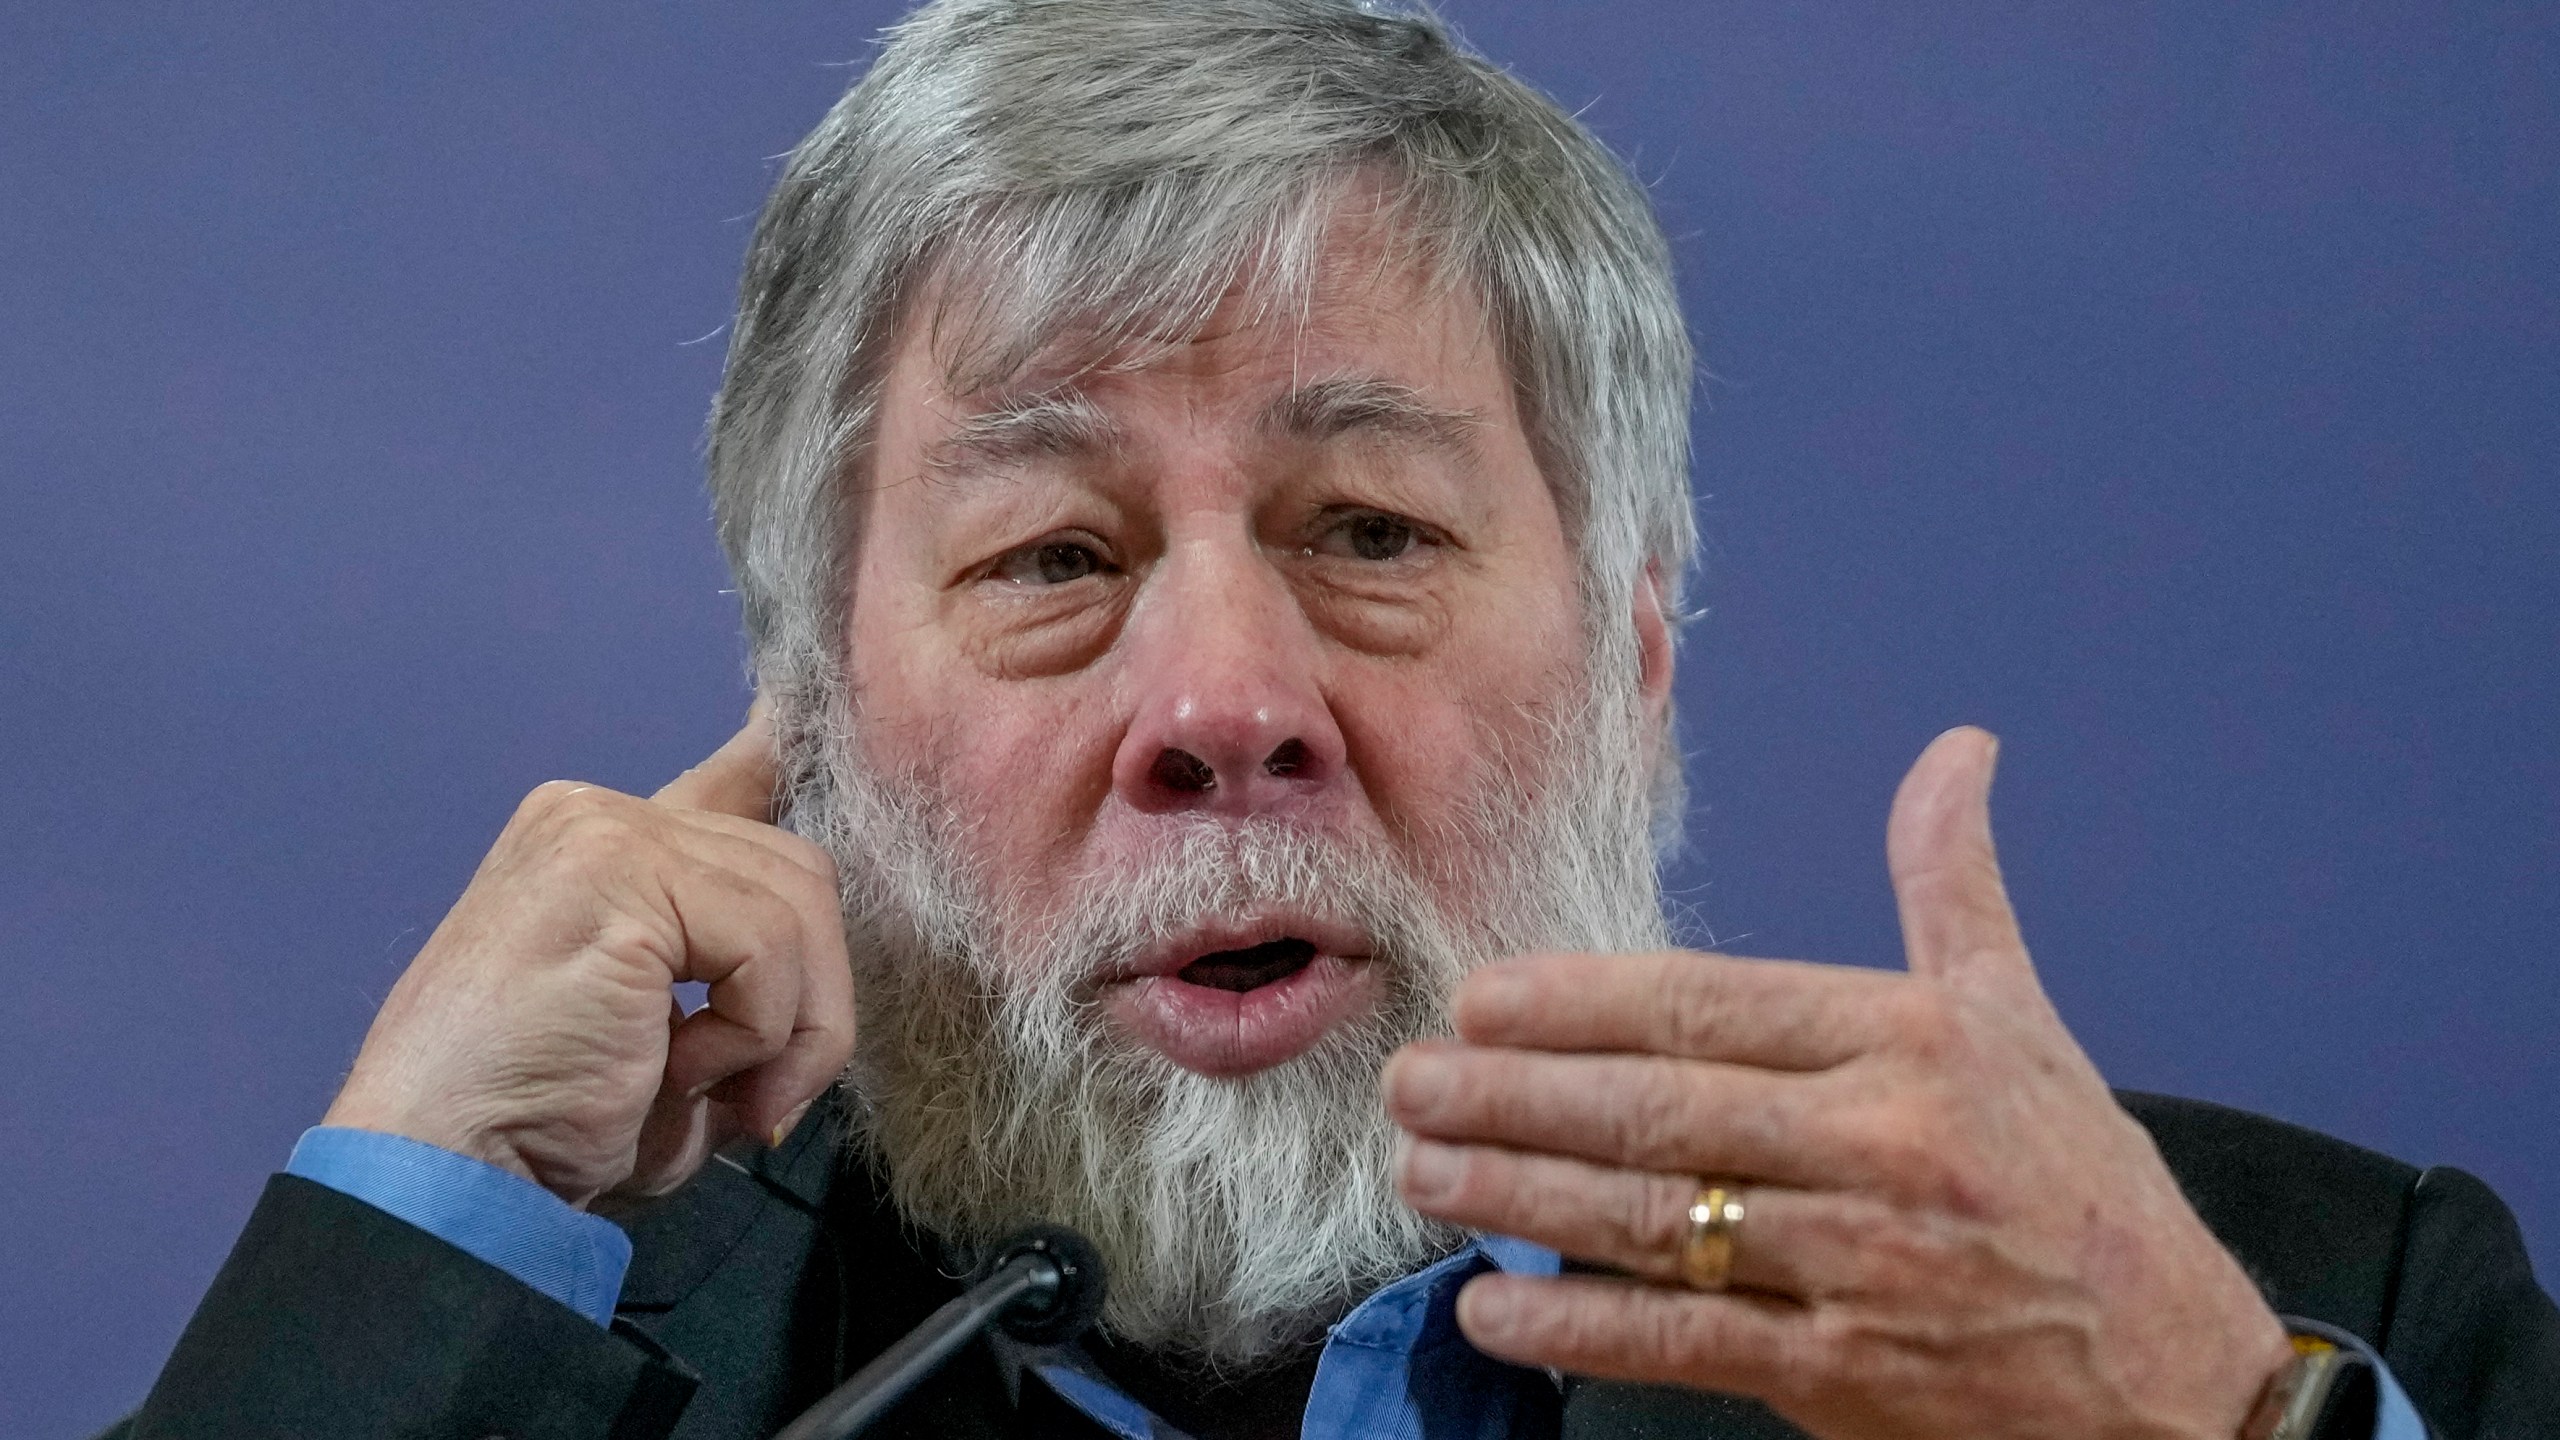 Apple co-founder Steve Wozniak speaks during a press conference after talks with Serbian President Aleksandar Vucic in Belgrade, Serbia, Wednesday, Dec. 6, 2023. Wozniak will receive a Serbian passport from the Balkan country's president after he was granted Balkan country's citizenship. (AP Photo/Darko Vojinovic)